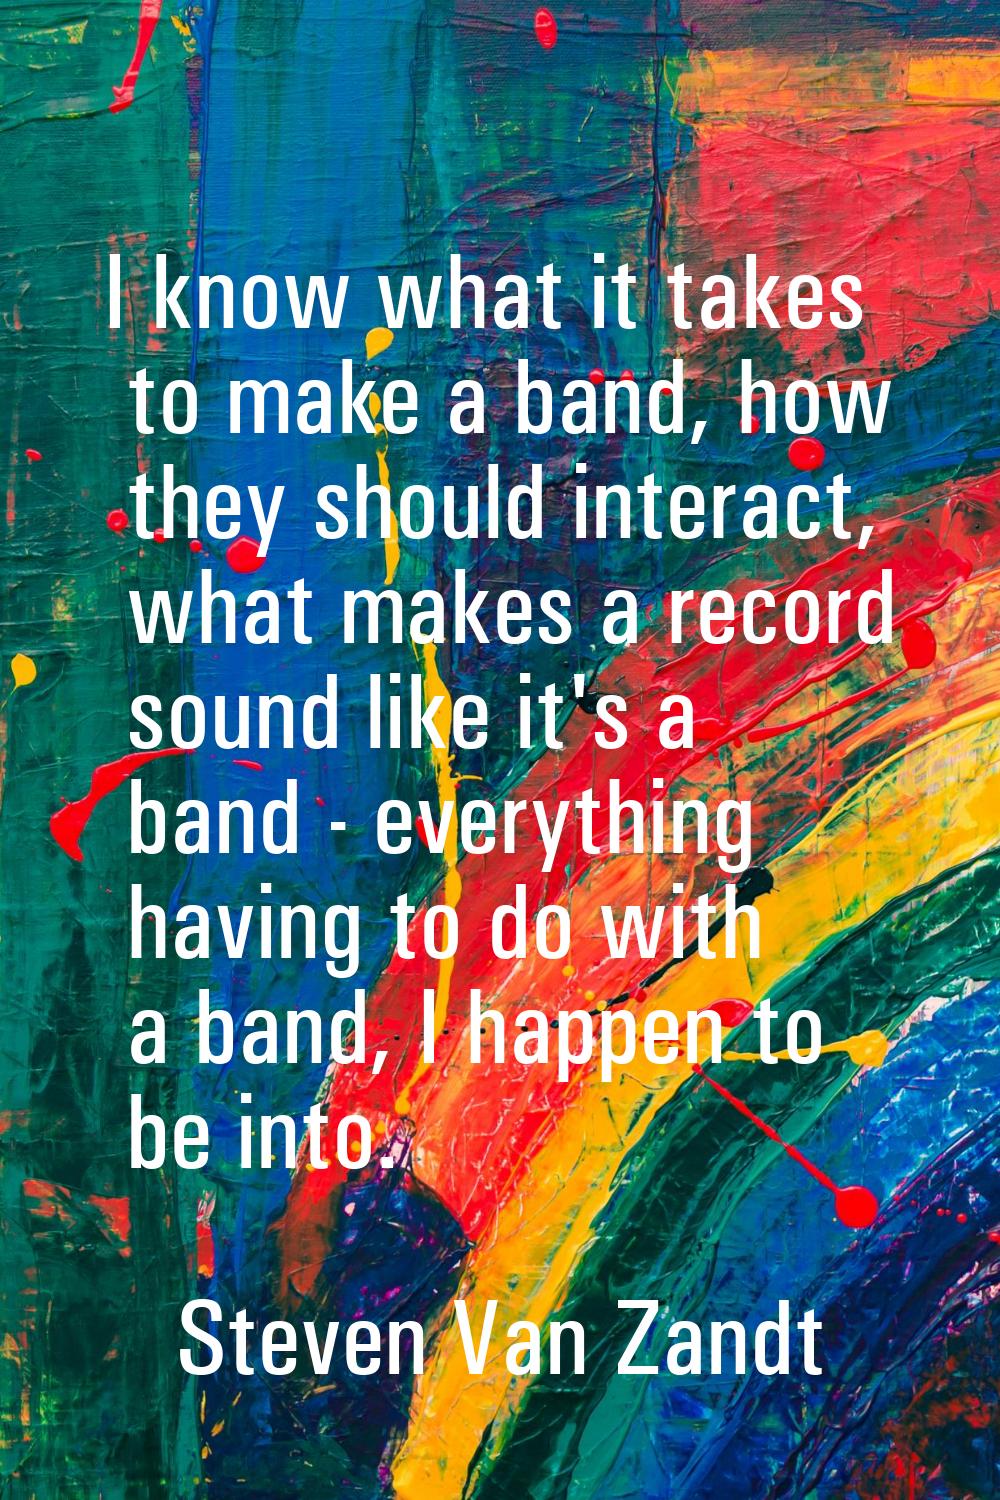 I know what it takes to make a band, how they should interact, what makes a record sound like it's 